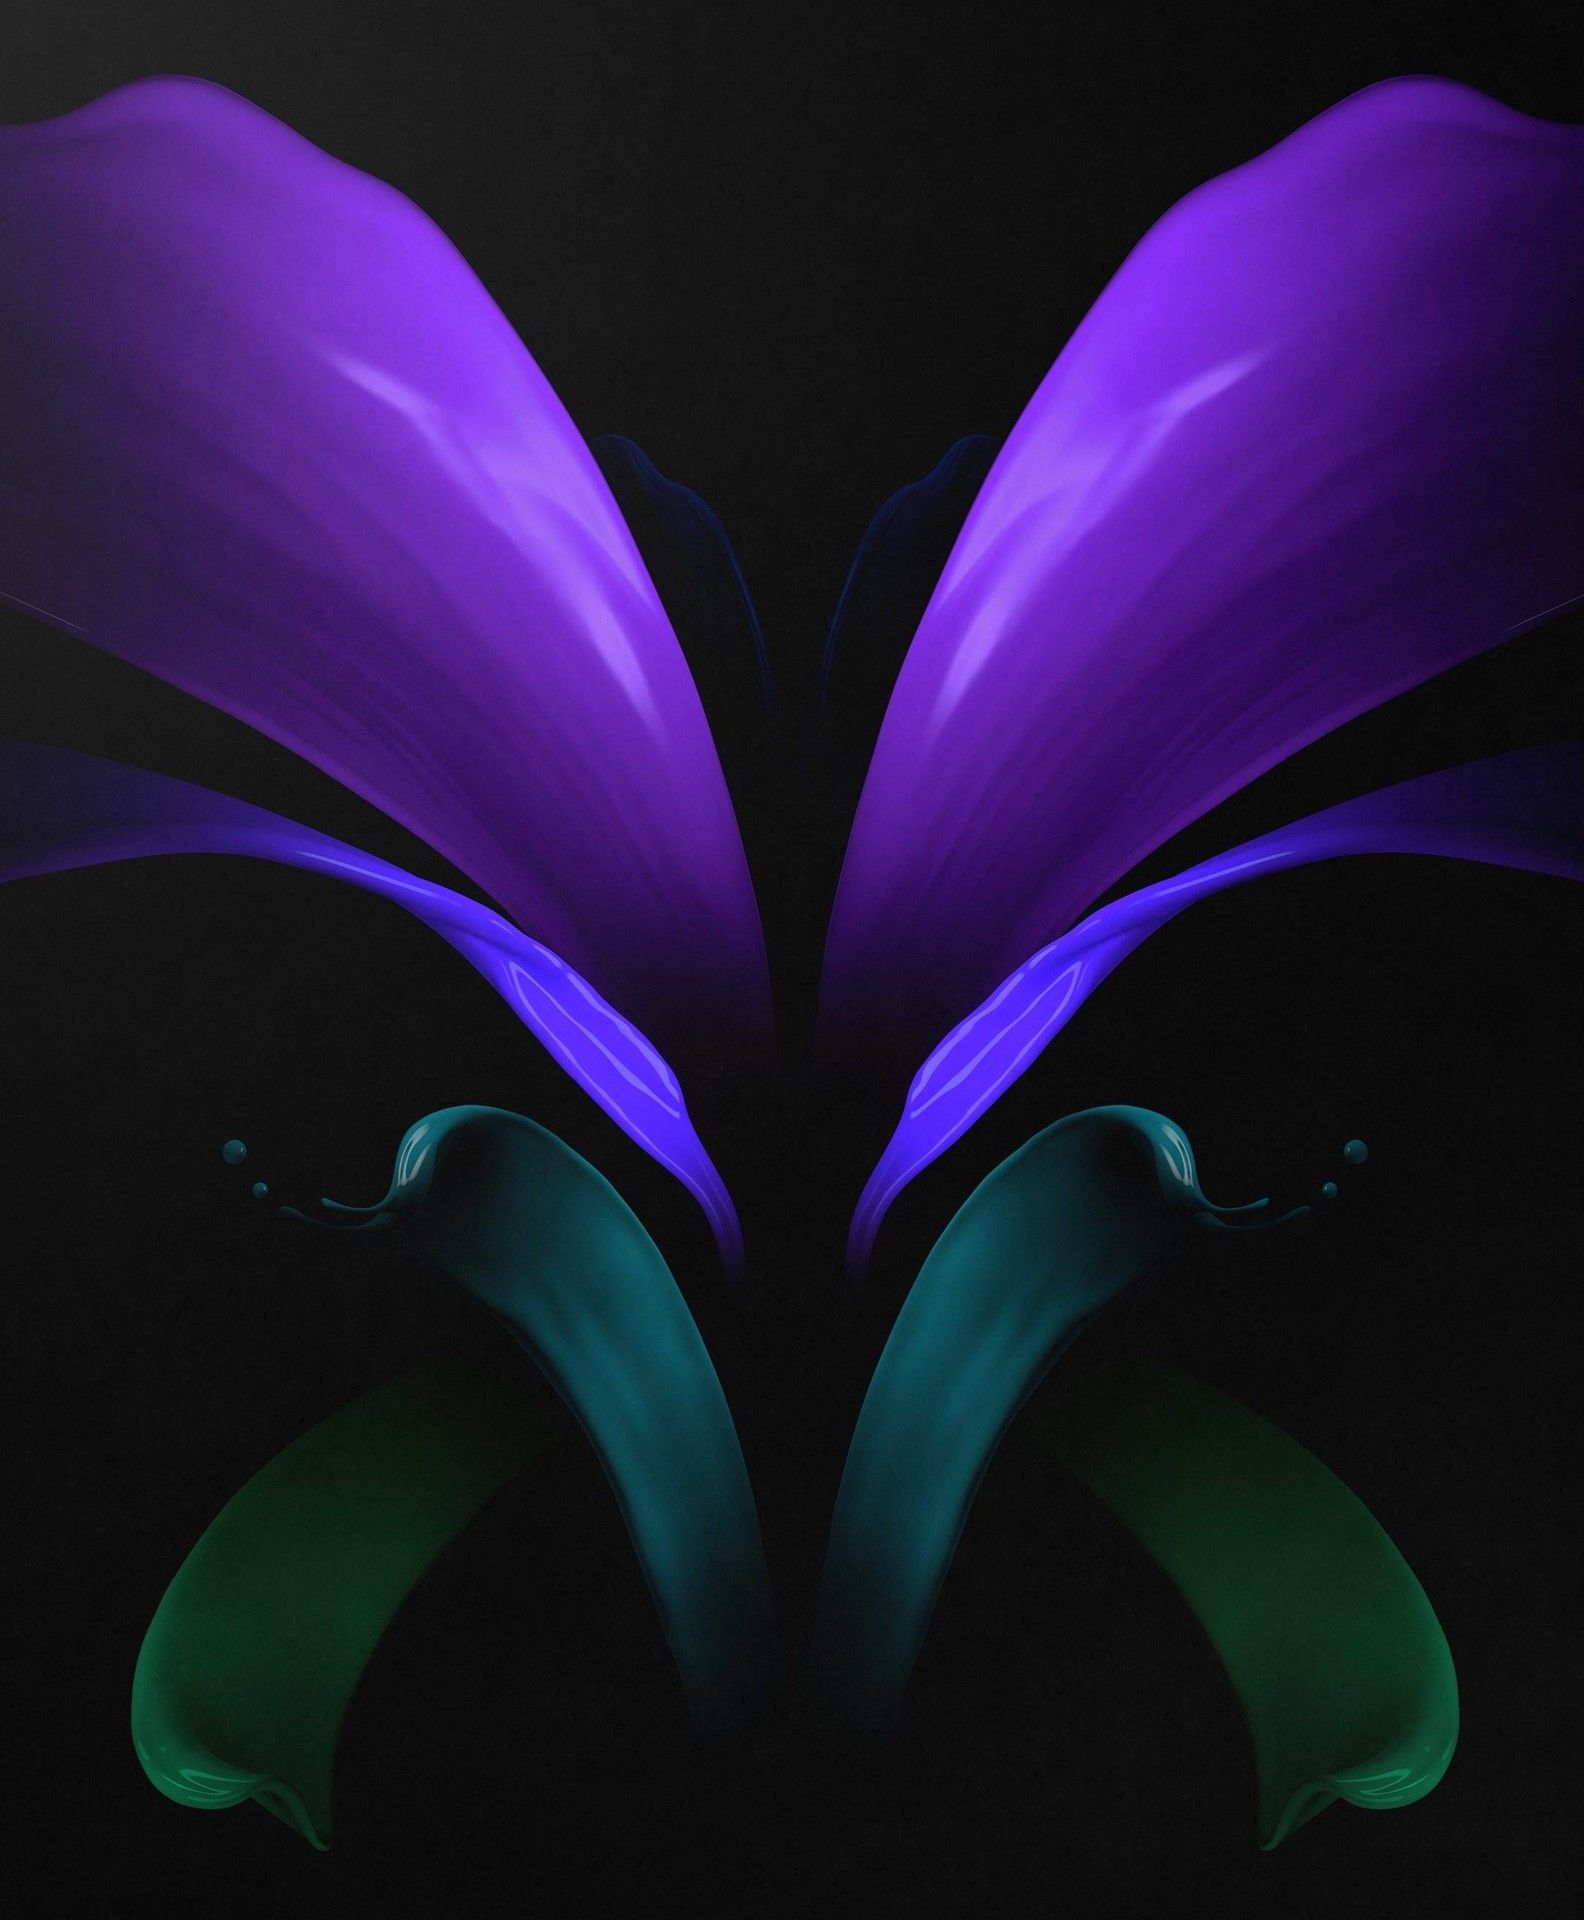 Here are the Samsung Galaxy Z Fold 2 wallpaper